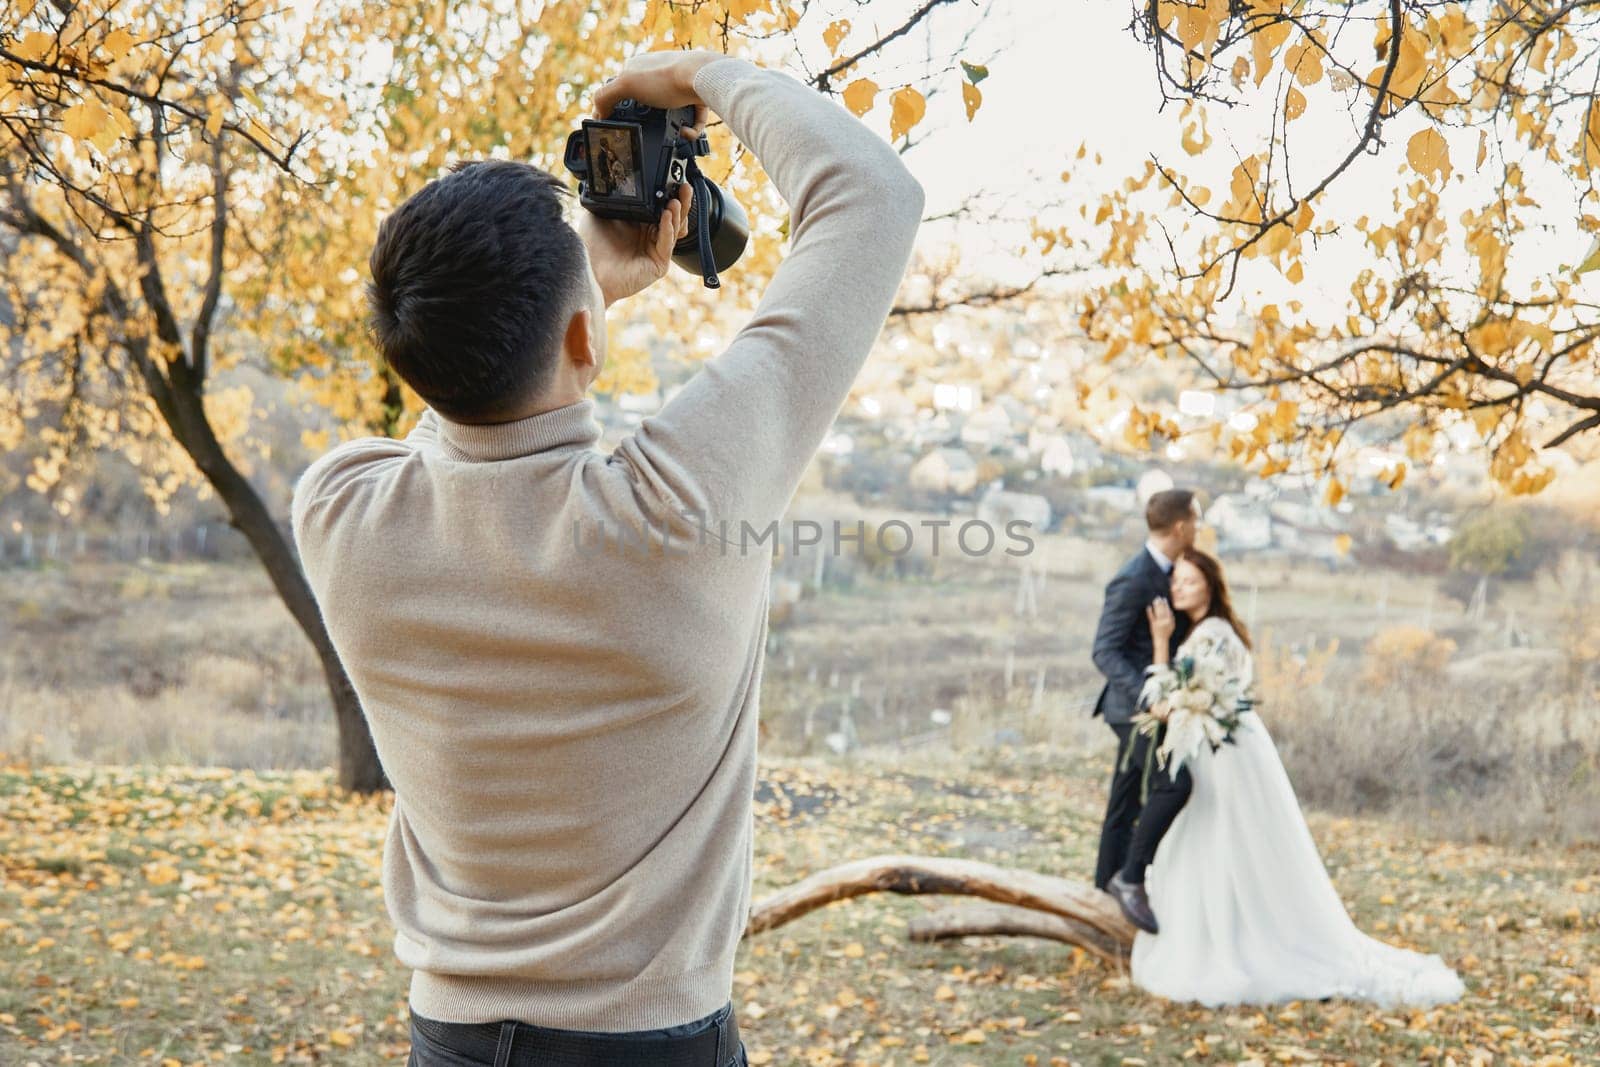 Professional wedding photographer in action. the bride and groom in nature in autumn